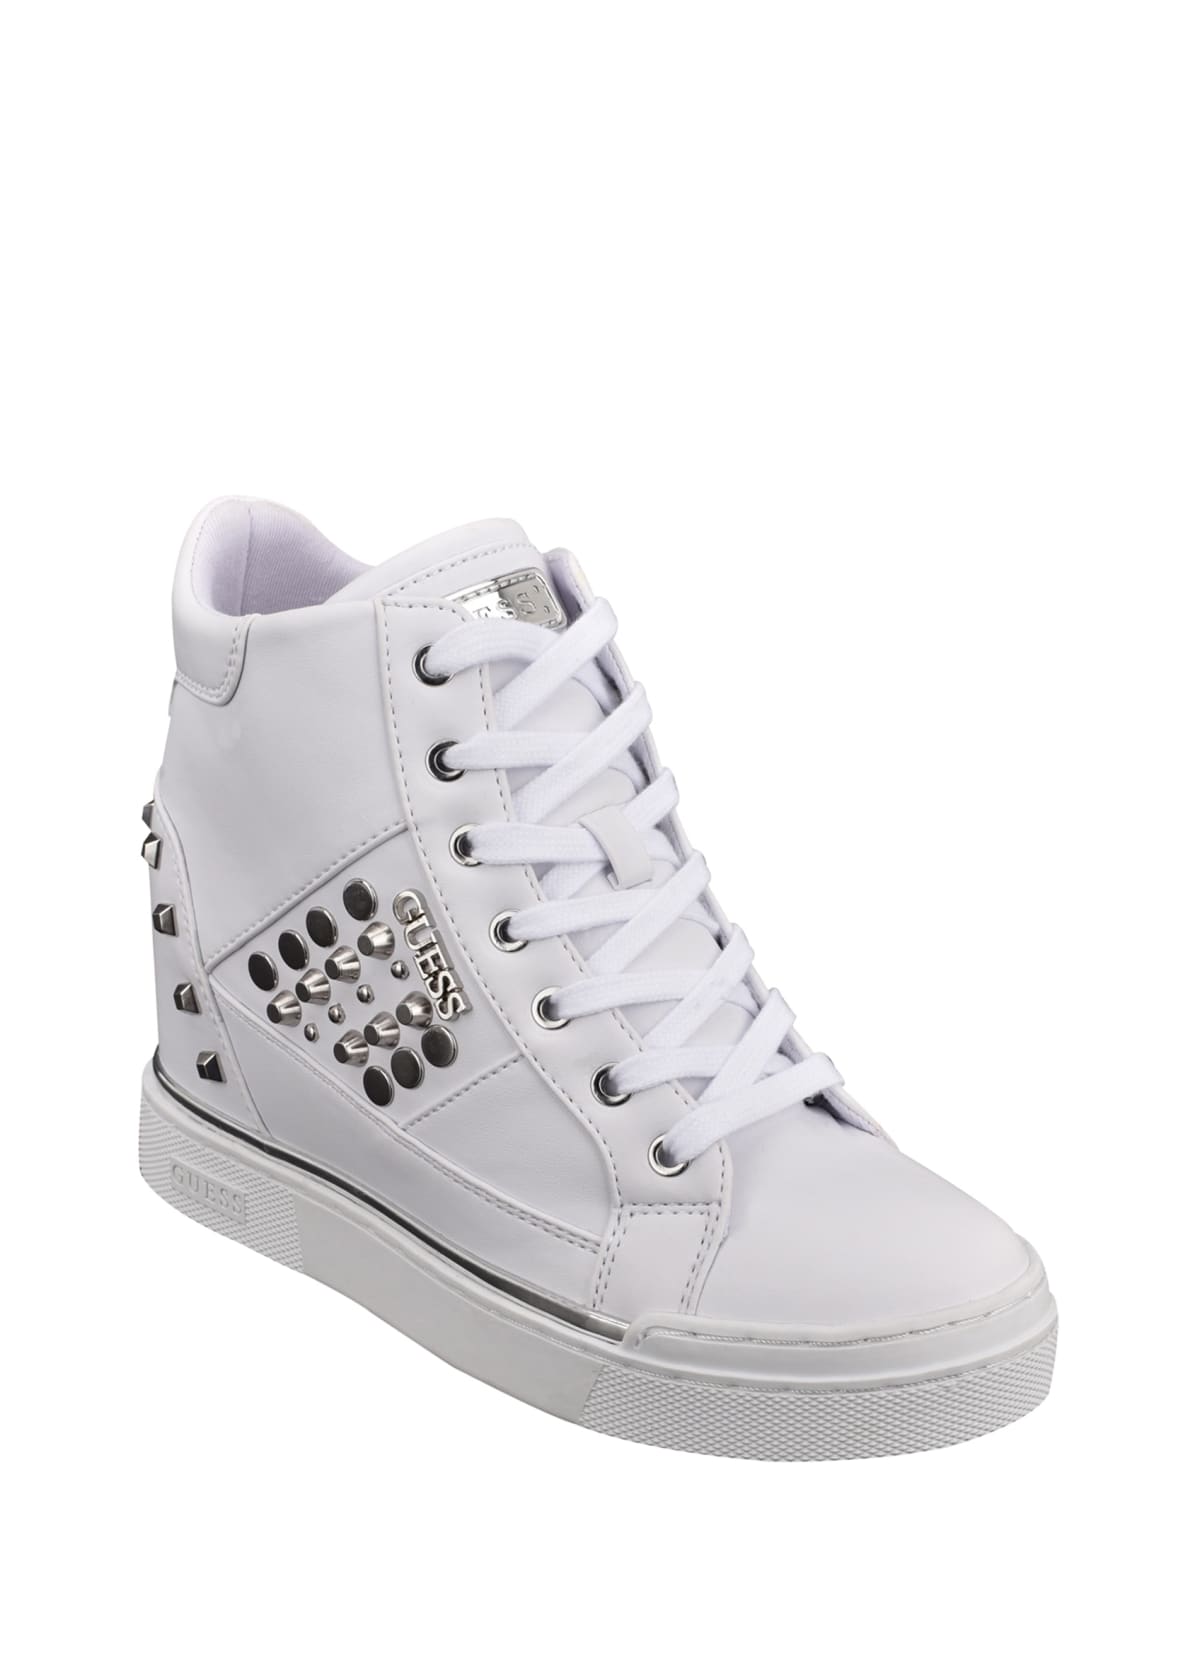 studded sneakers cheap